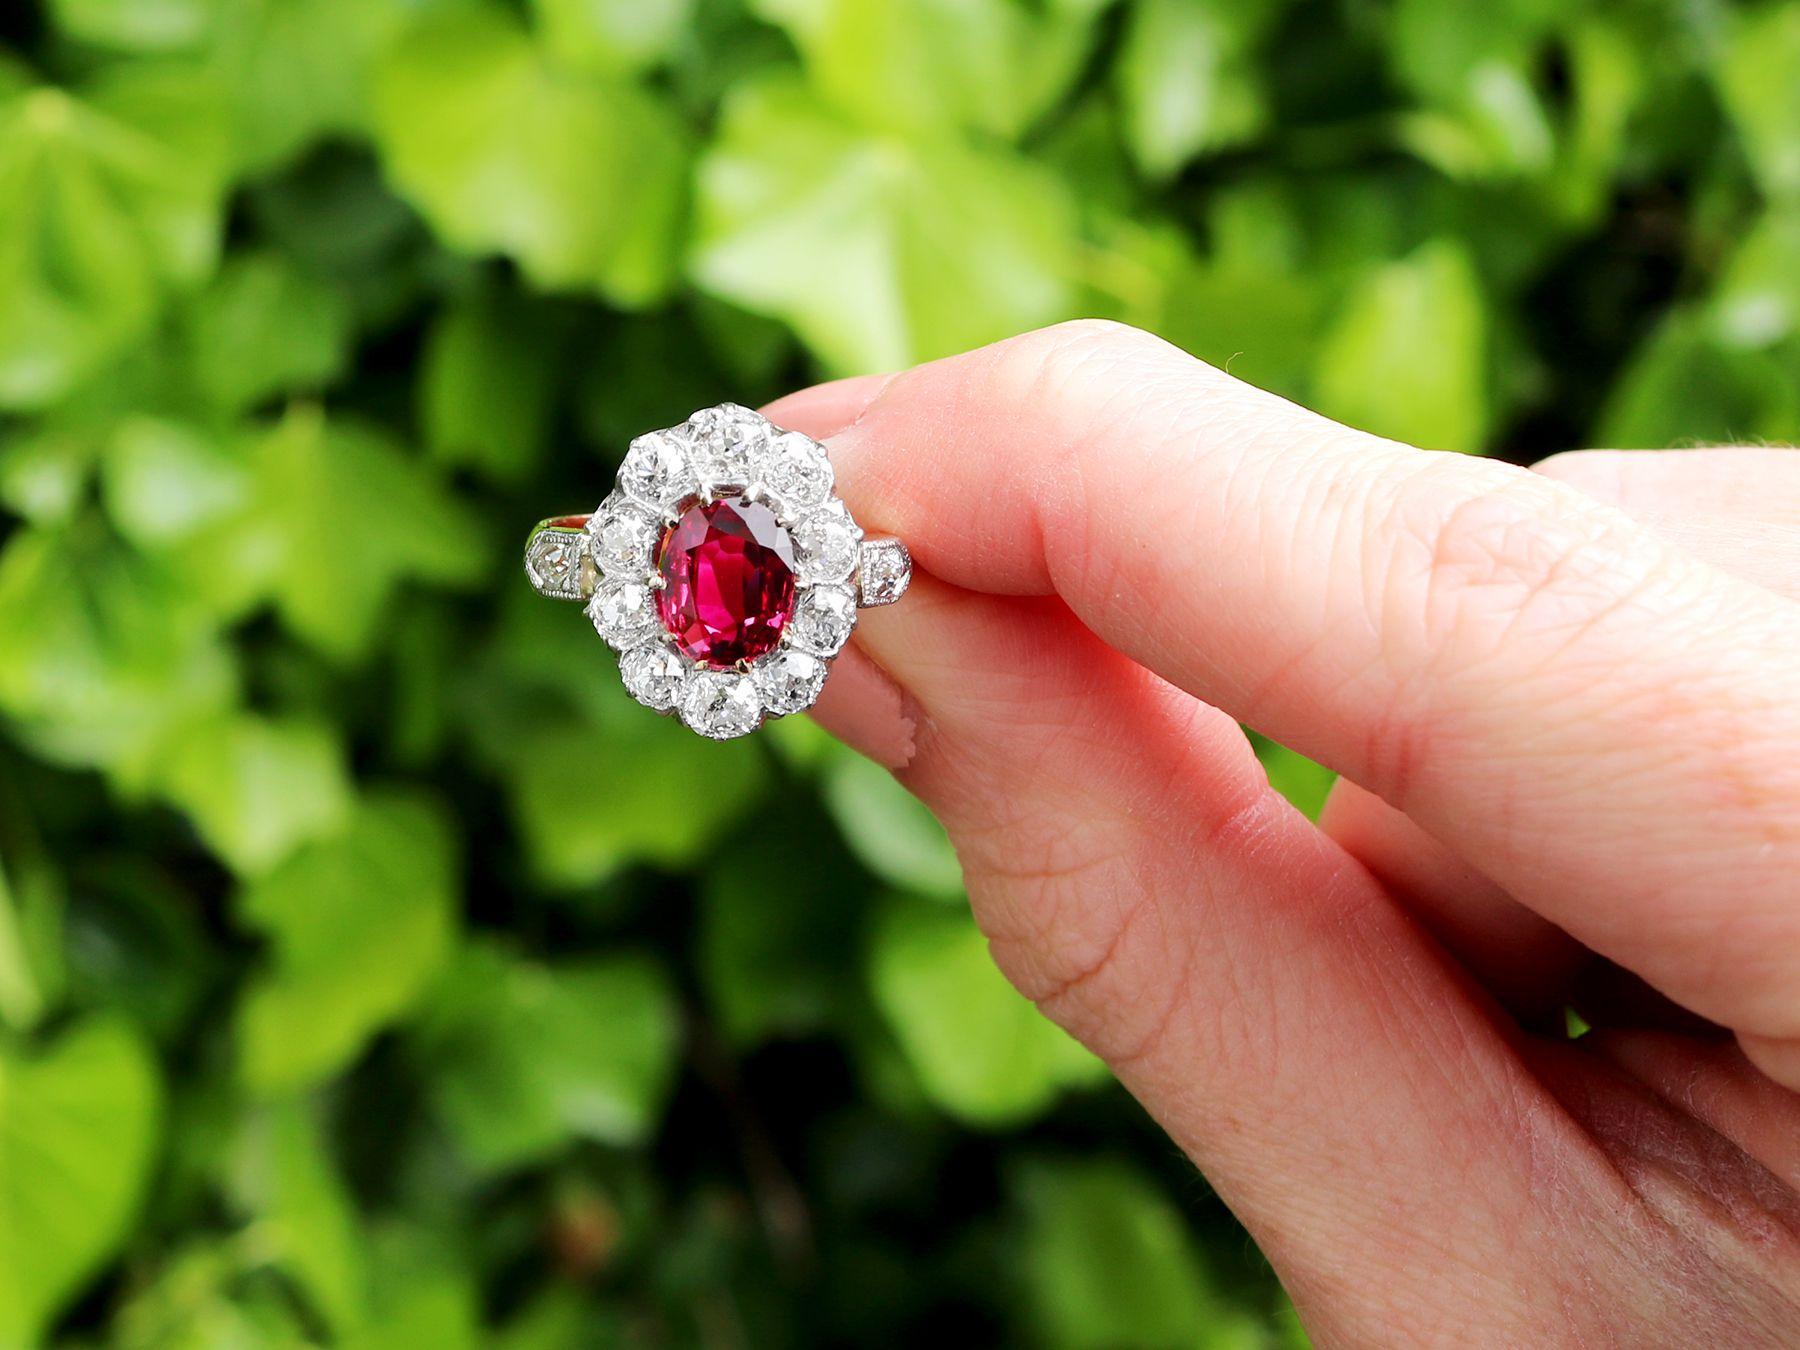 A stunning, fine and impressive 1.20 carat ruby and 1.54 carat diamond, 18 karat rose gold dress ring; part of our diverse vintage jewellery collections

This stunning, fine and impressive antique ruby and diamond ring has been crafted in 18k rose